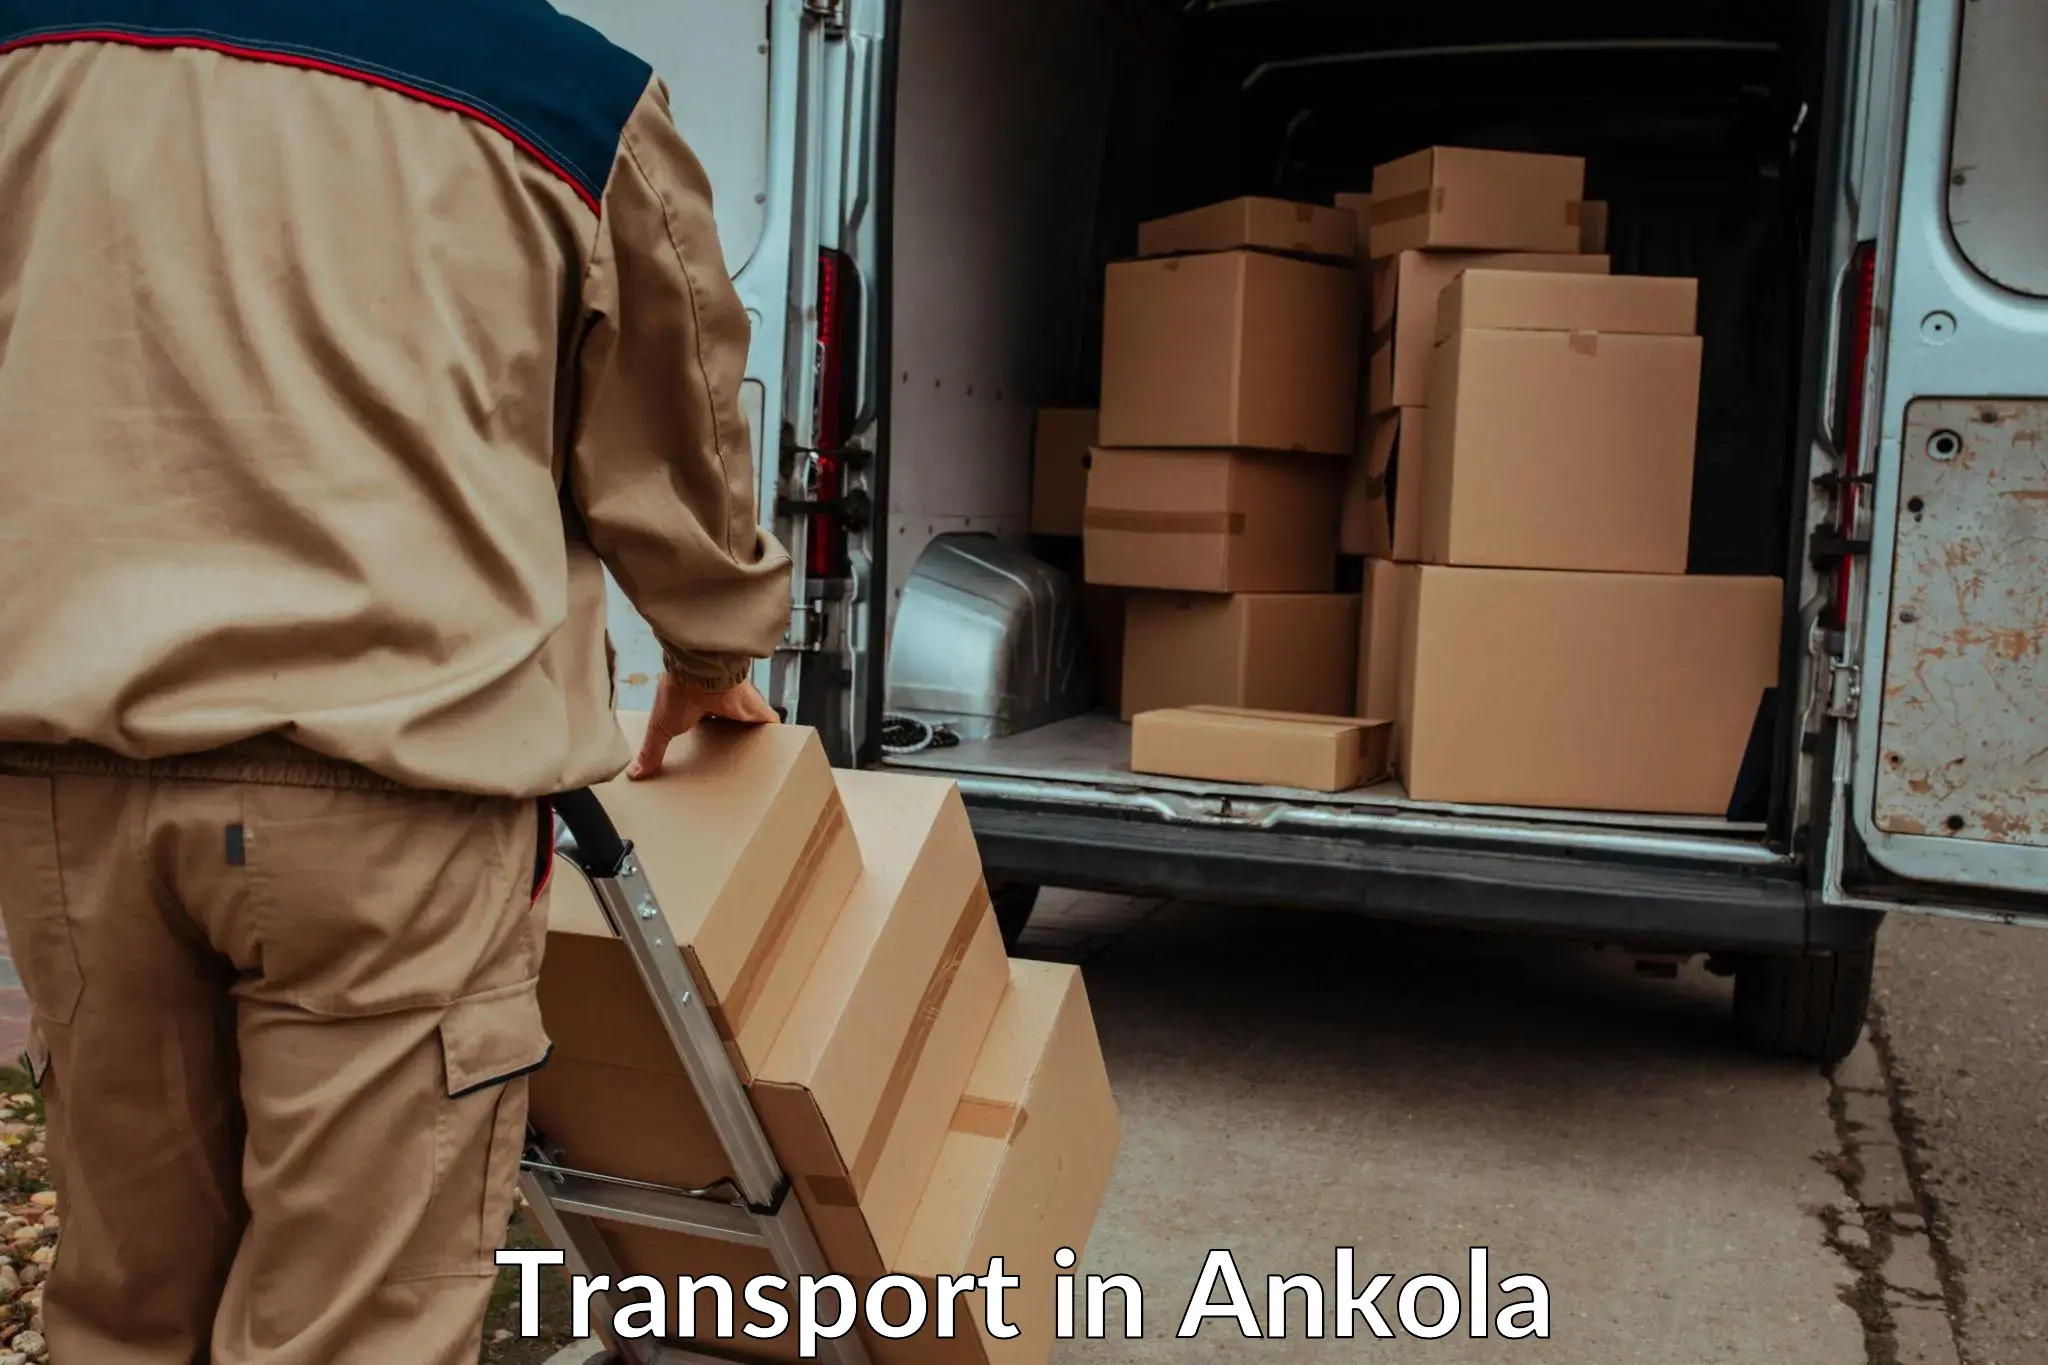 Air cargo transport services in Ankola